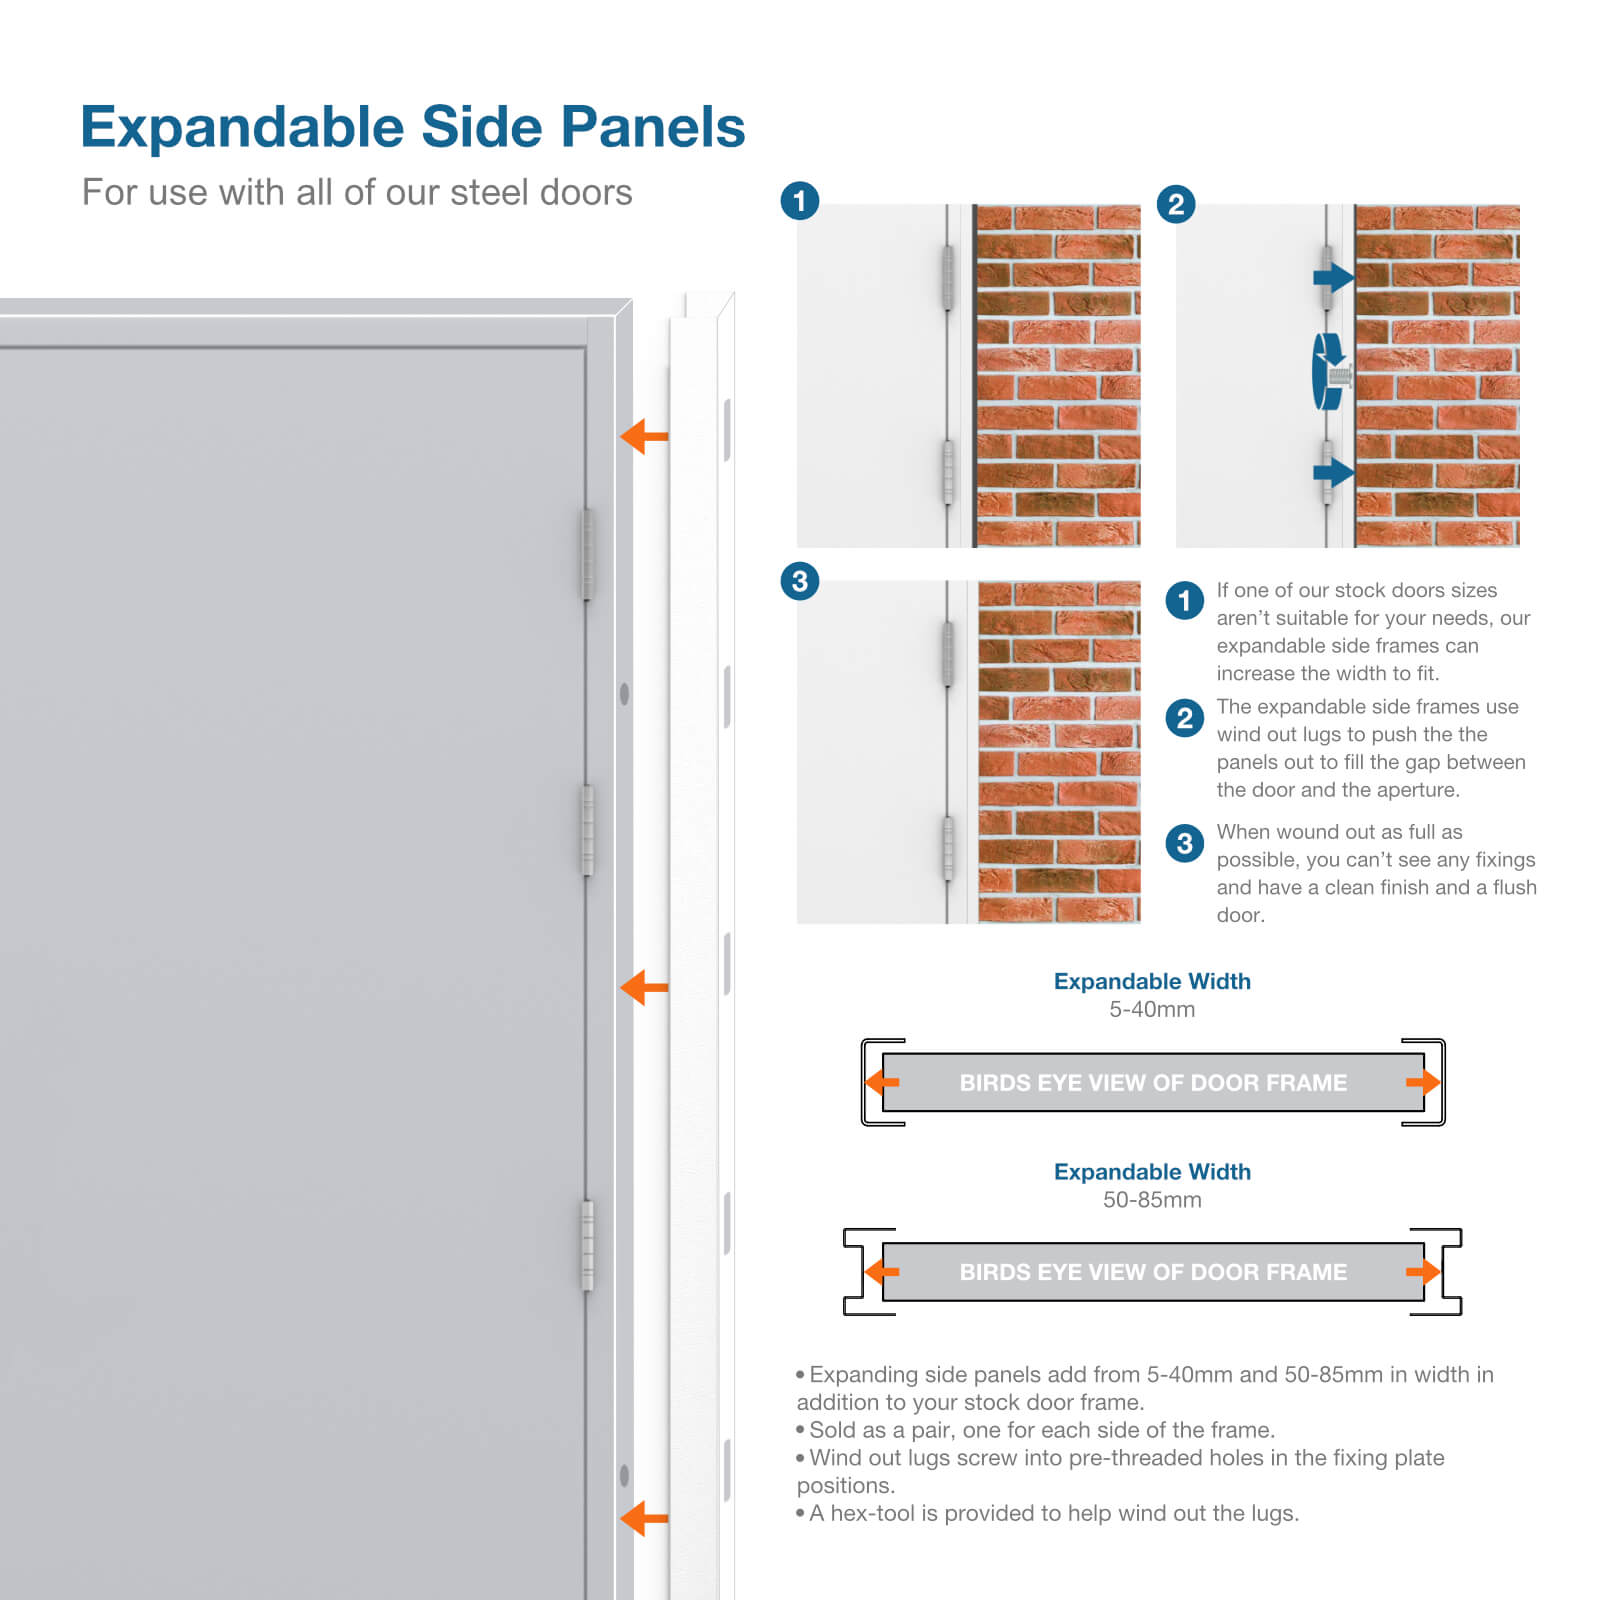 more information image for expandable side panels